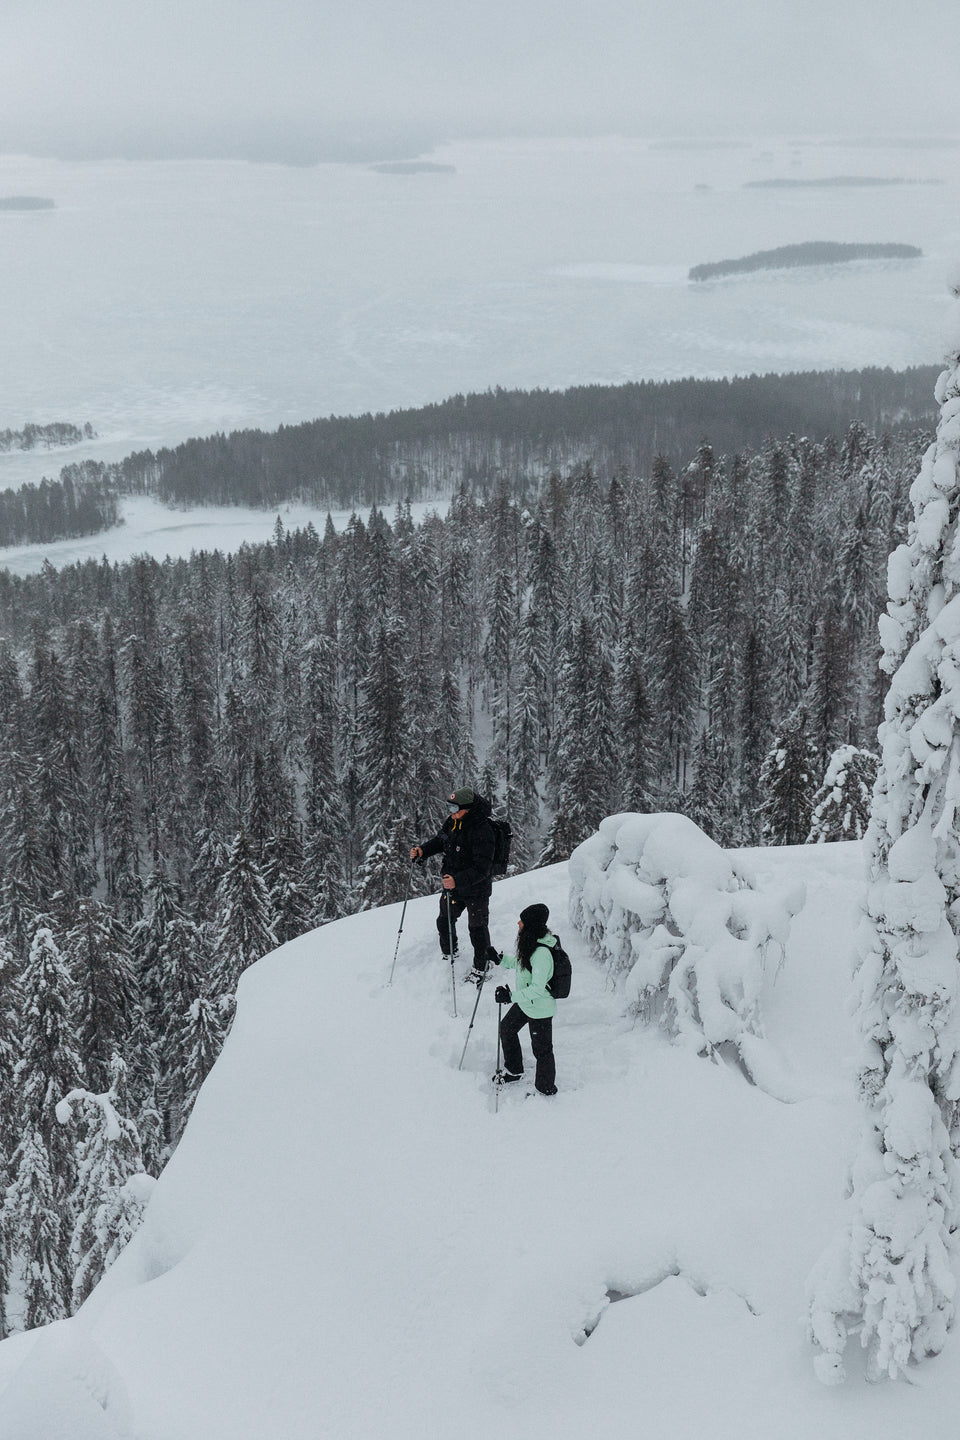 two people at the top of a cliff looking out over a snow covered forest wearing black backpacks and rucksacks